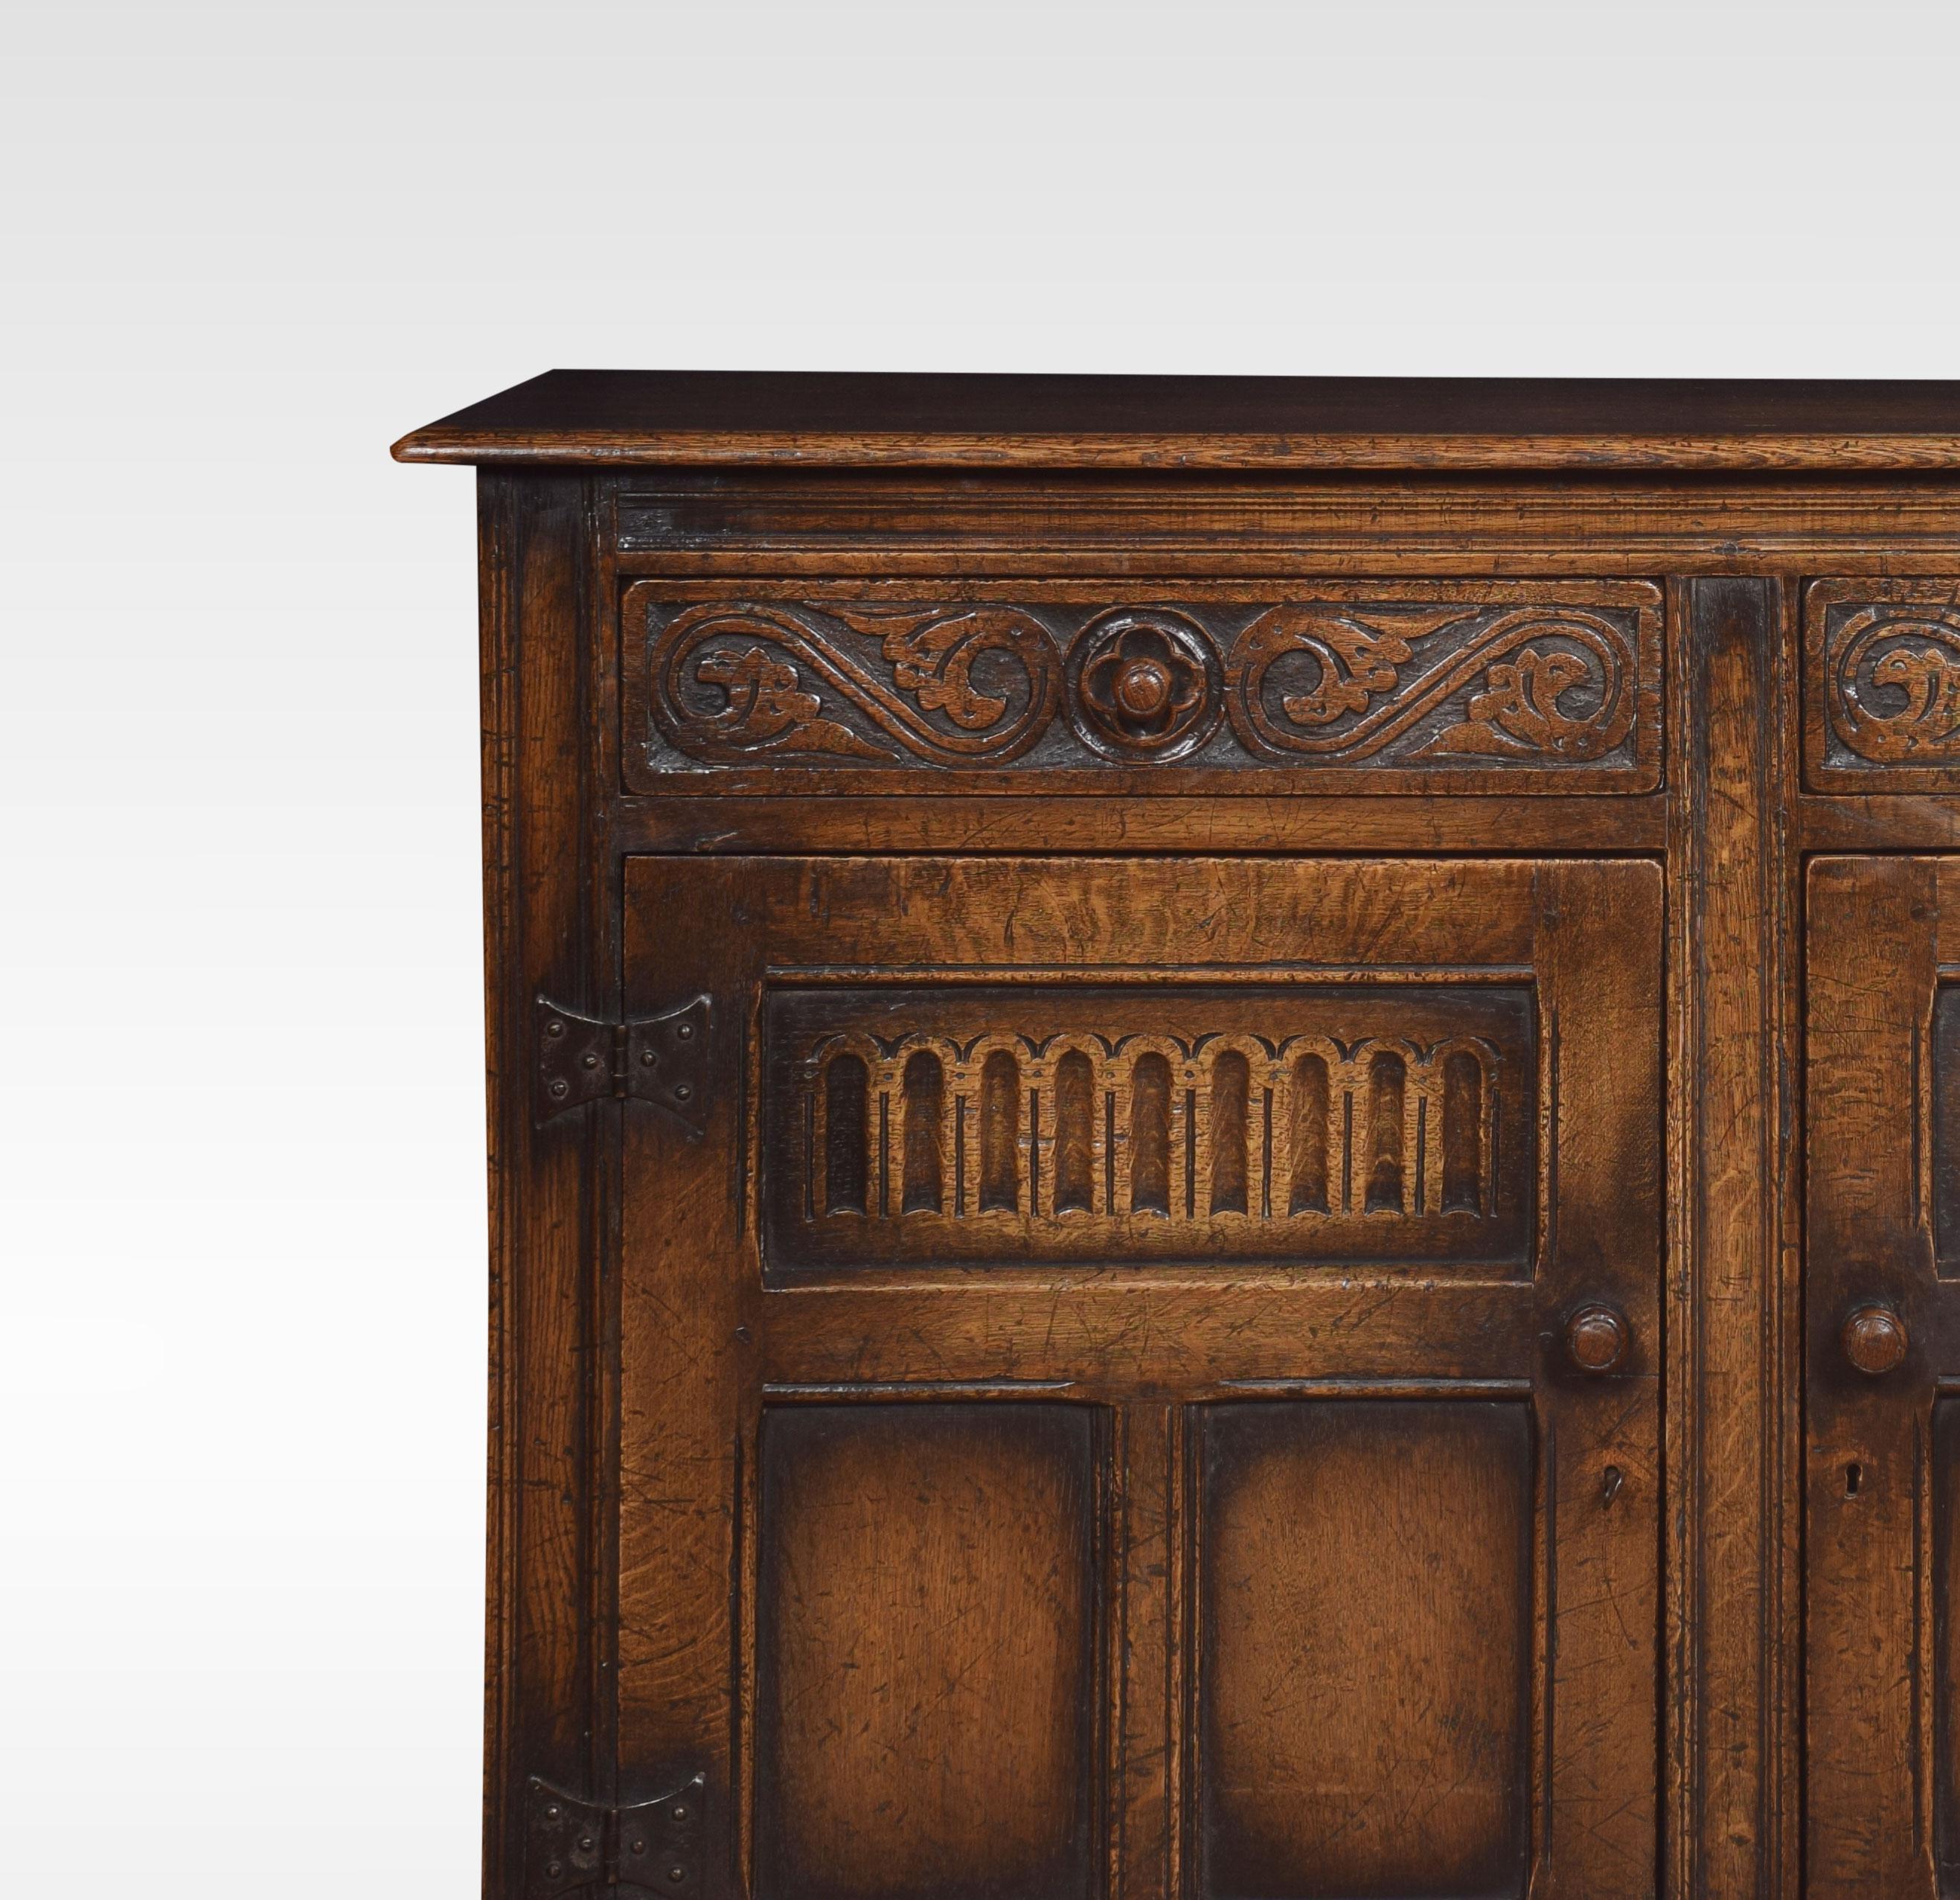 Jacobean style oak cupboard, the large rectangular top to the frieze fitted with two drawers above two carved paneled doors opening to reveal a large storage area. All raised up on style feet.
Dimensions:
Height 34.5 inches
Width 48 inches
Depth